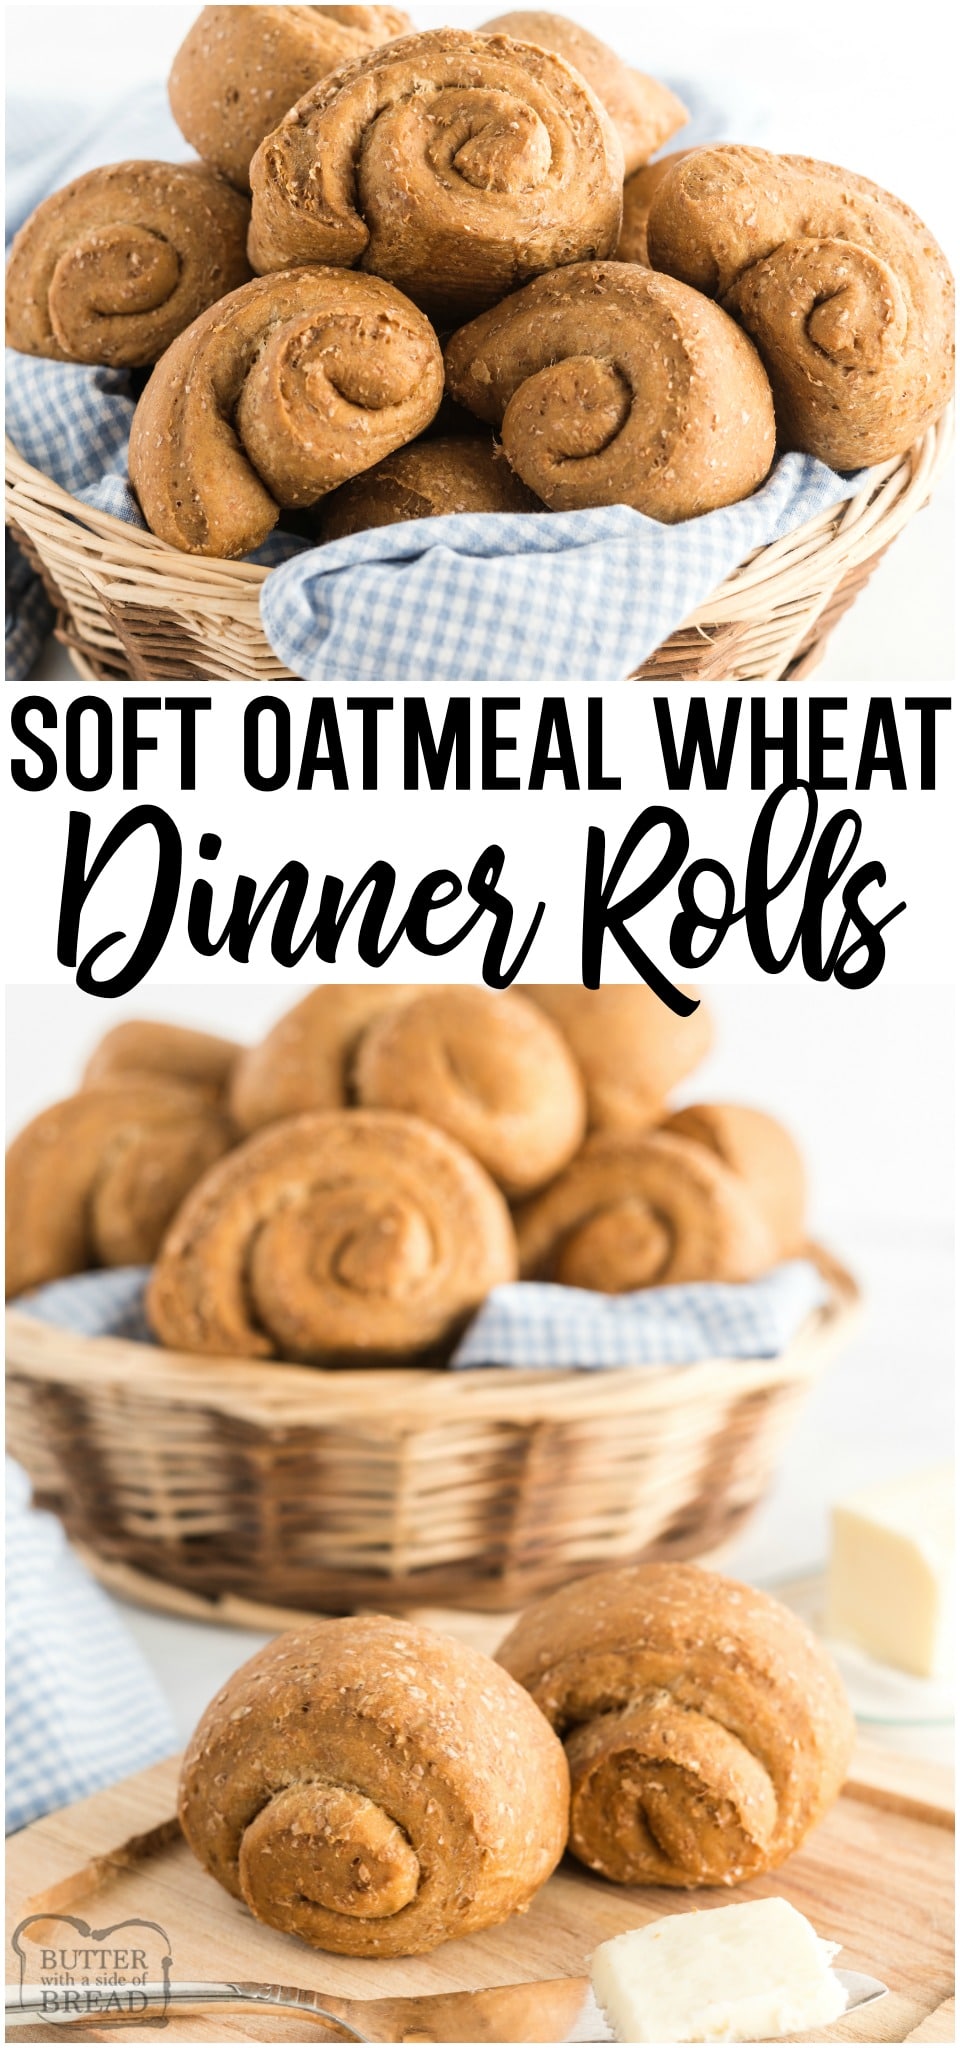 Soft Wheat Dinner Rolls made with whole wheat flour, yeast, oats and molasses for a homemade roll with fantastic taste and texture! Family favorite wheat dinner roll recipe!